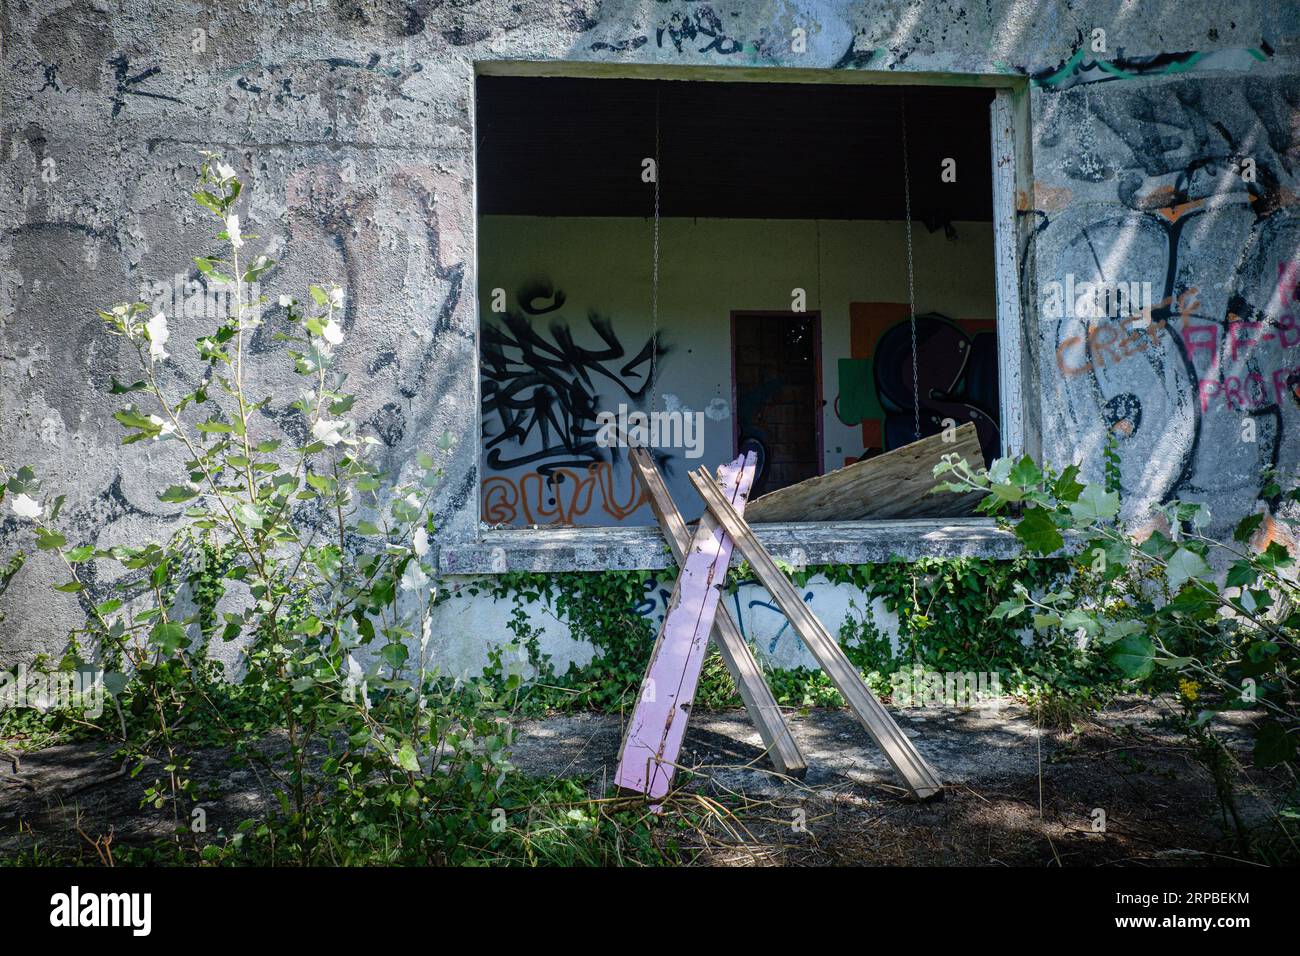 Wooden boards in front of the window of an abandoned house with graffiti. Stock Photo